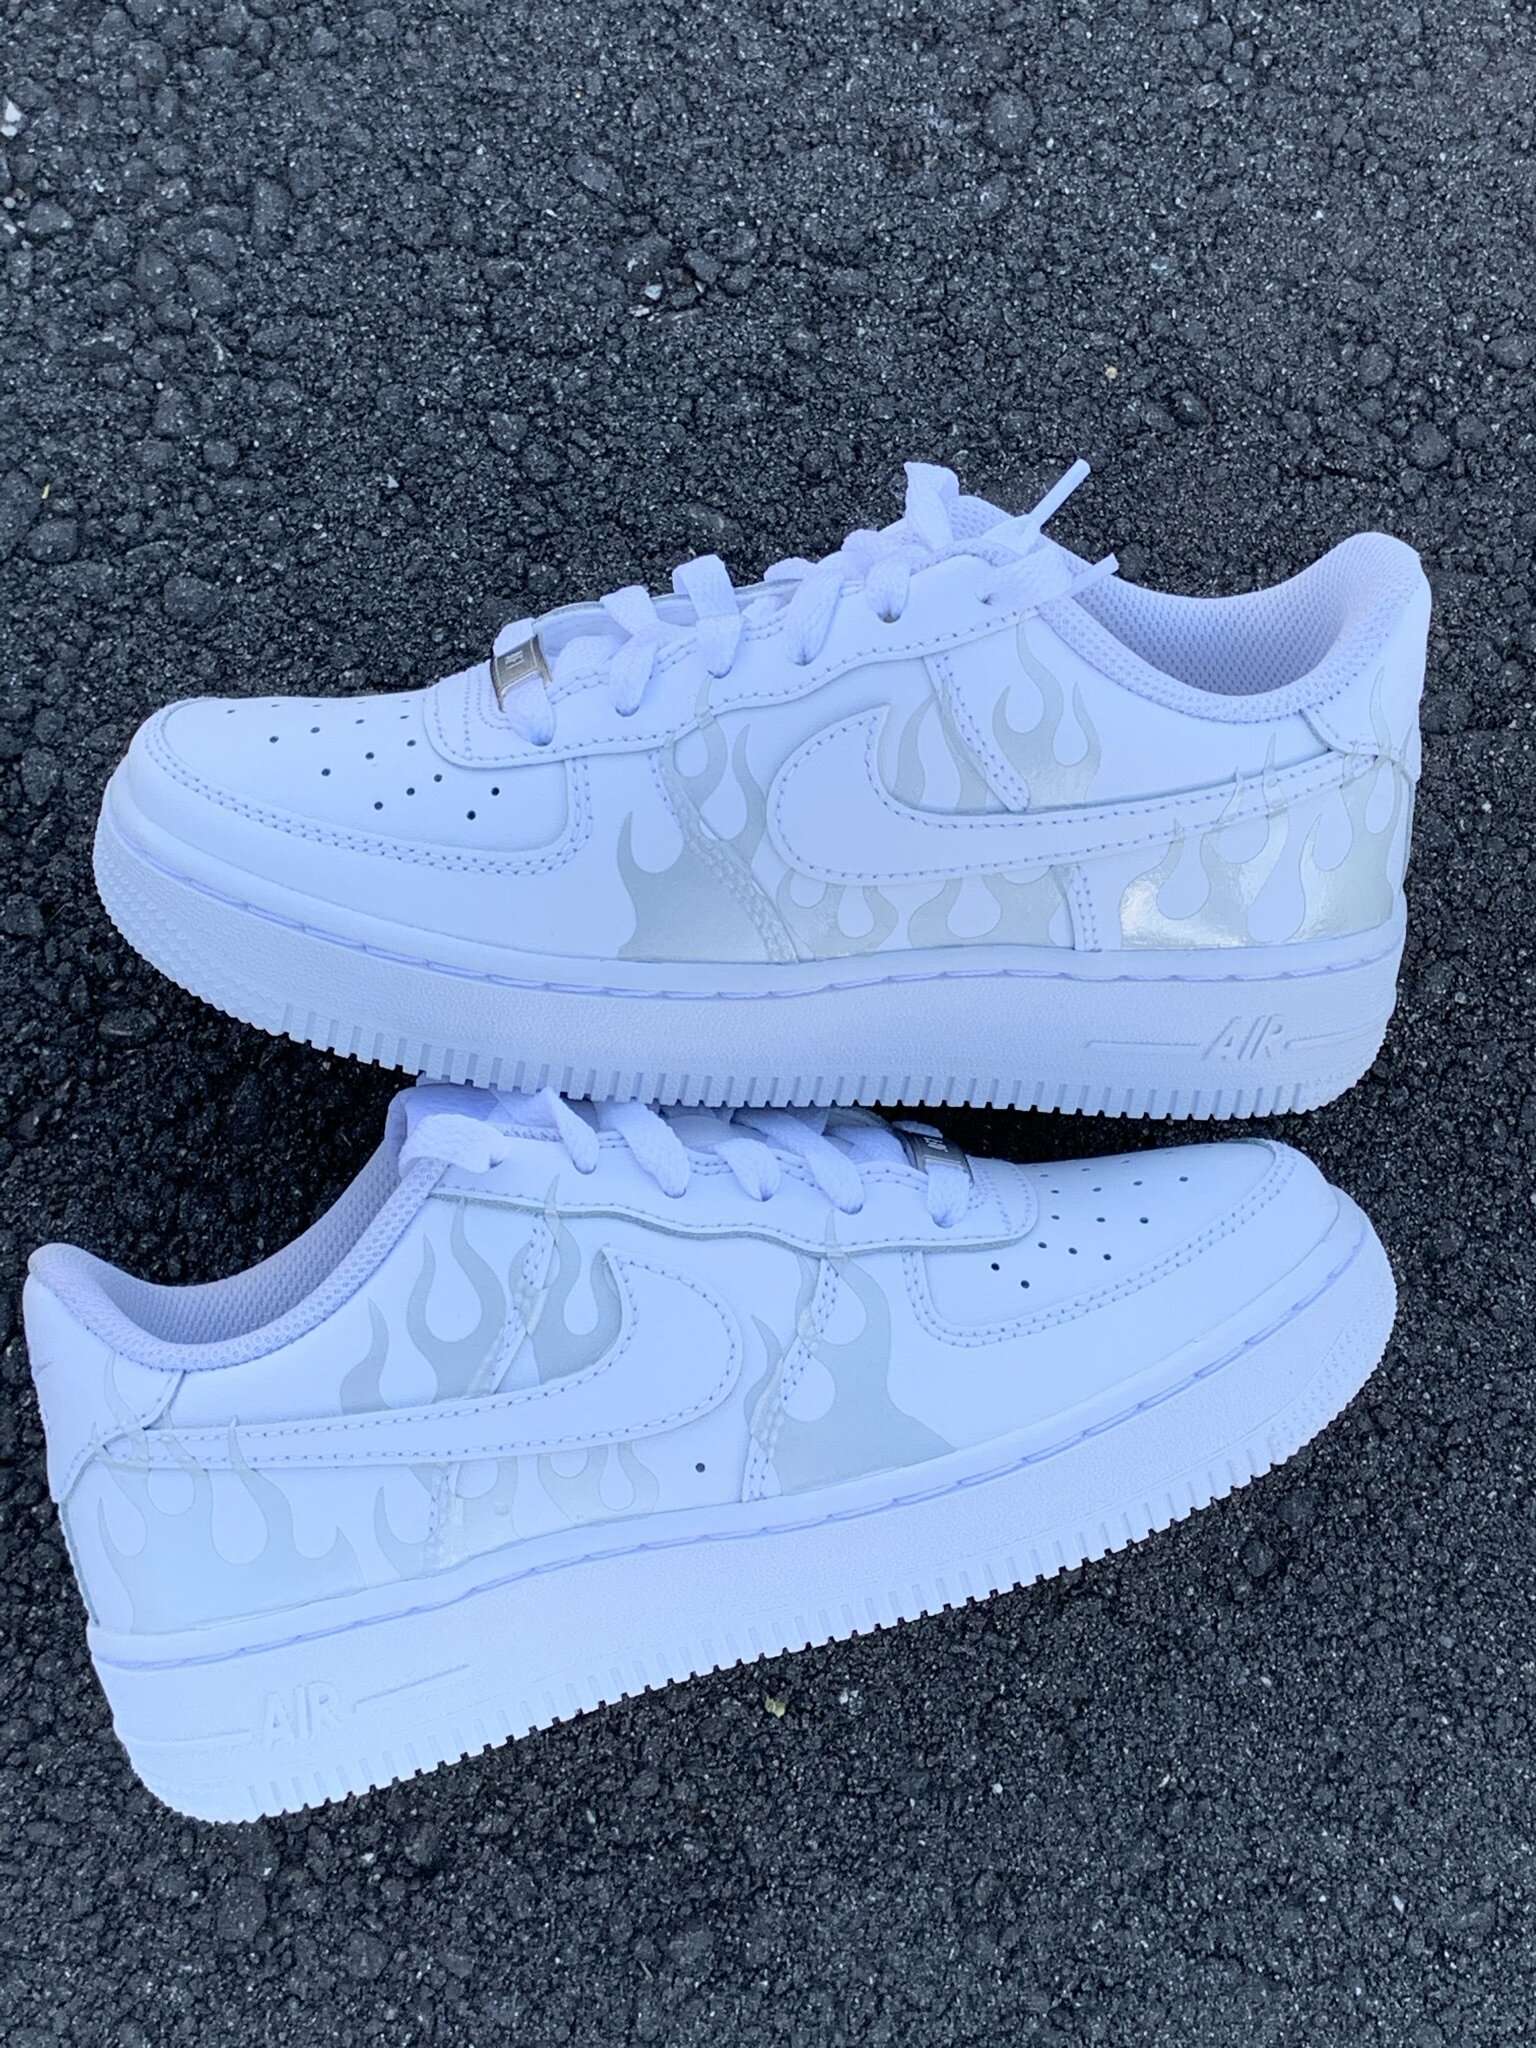 Nike AF1 Air Force 1 Custom Reflective Flames All Sizes 